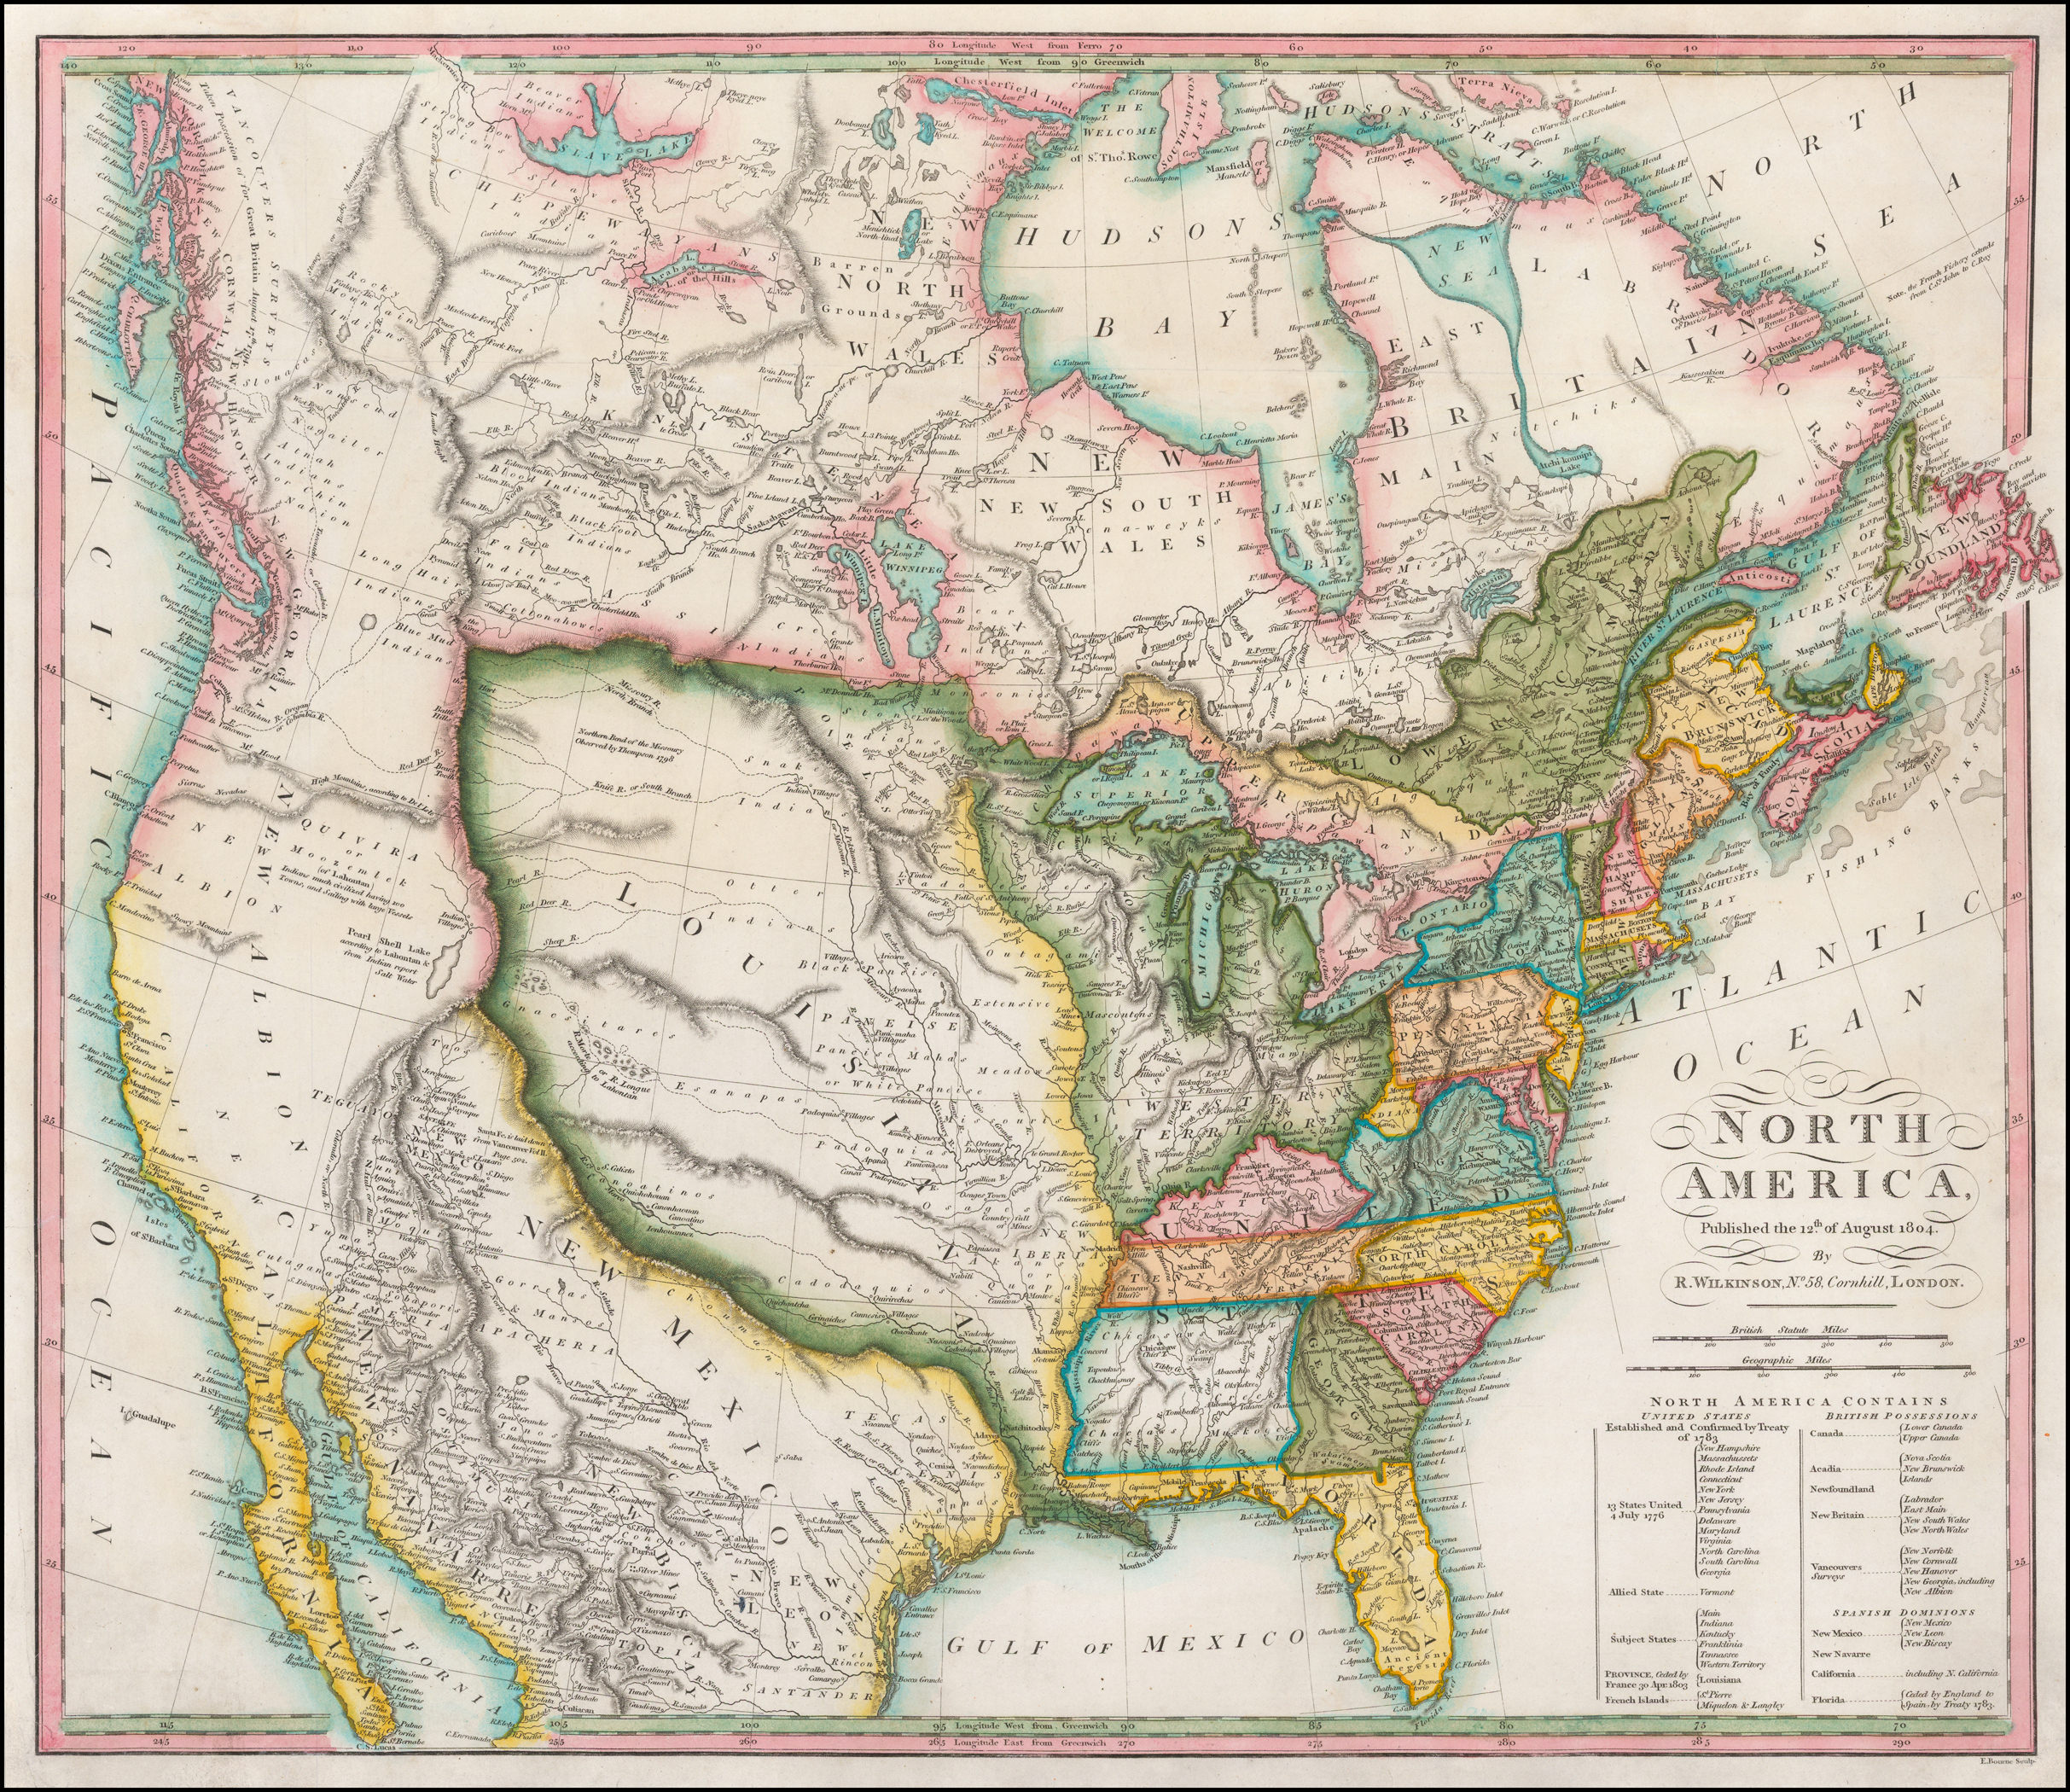 List 99+ Images in 1804, the louisiana territory was what fraction of the united states’ total land? Full HD, 2k, 4k